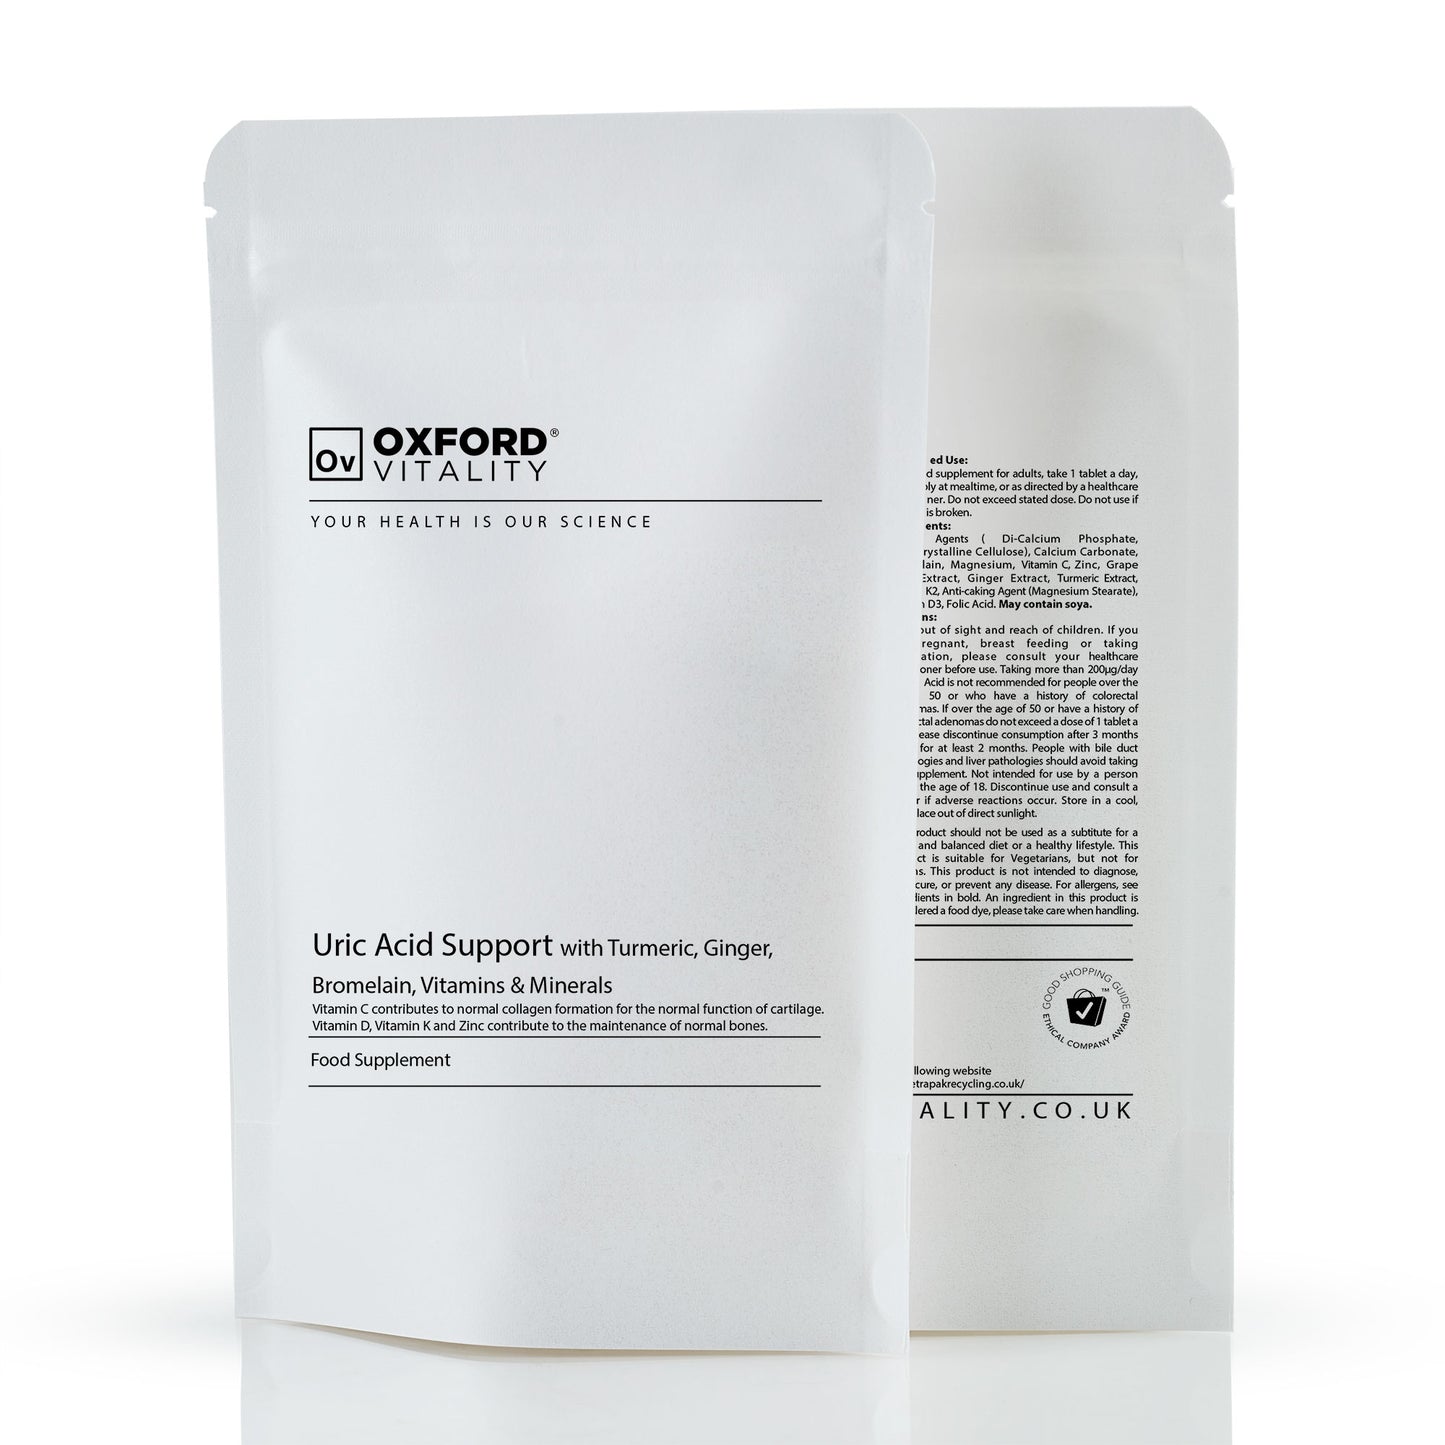 Uric Acid Support with Turmeric, Ginger, Bromelain, Vitamins & Minerals